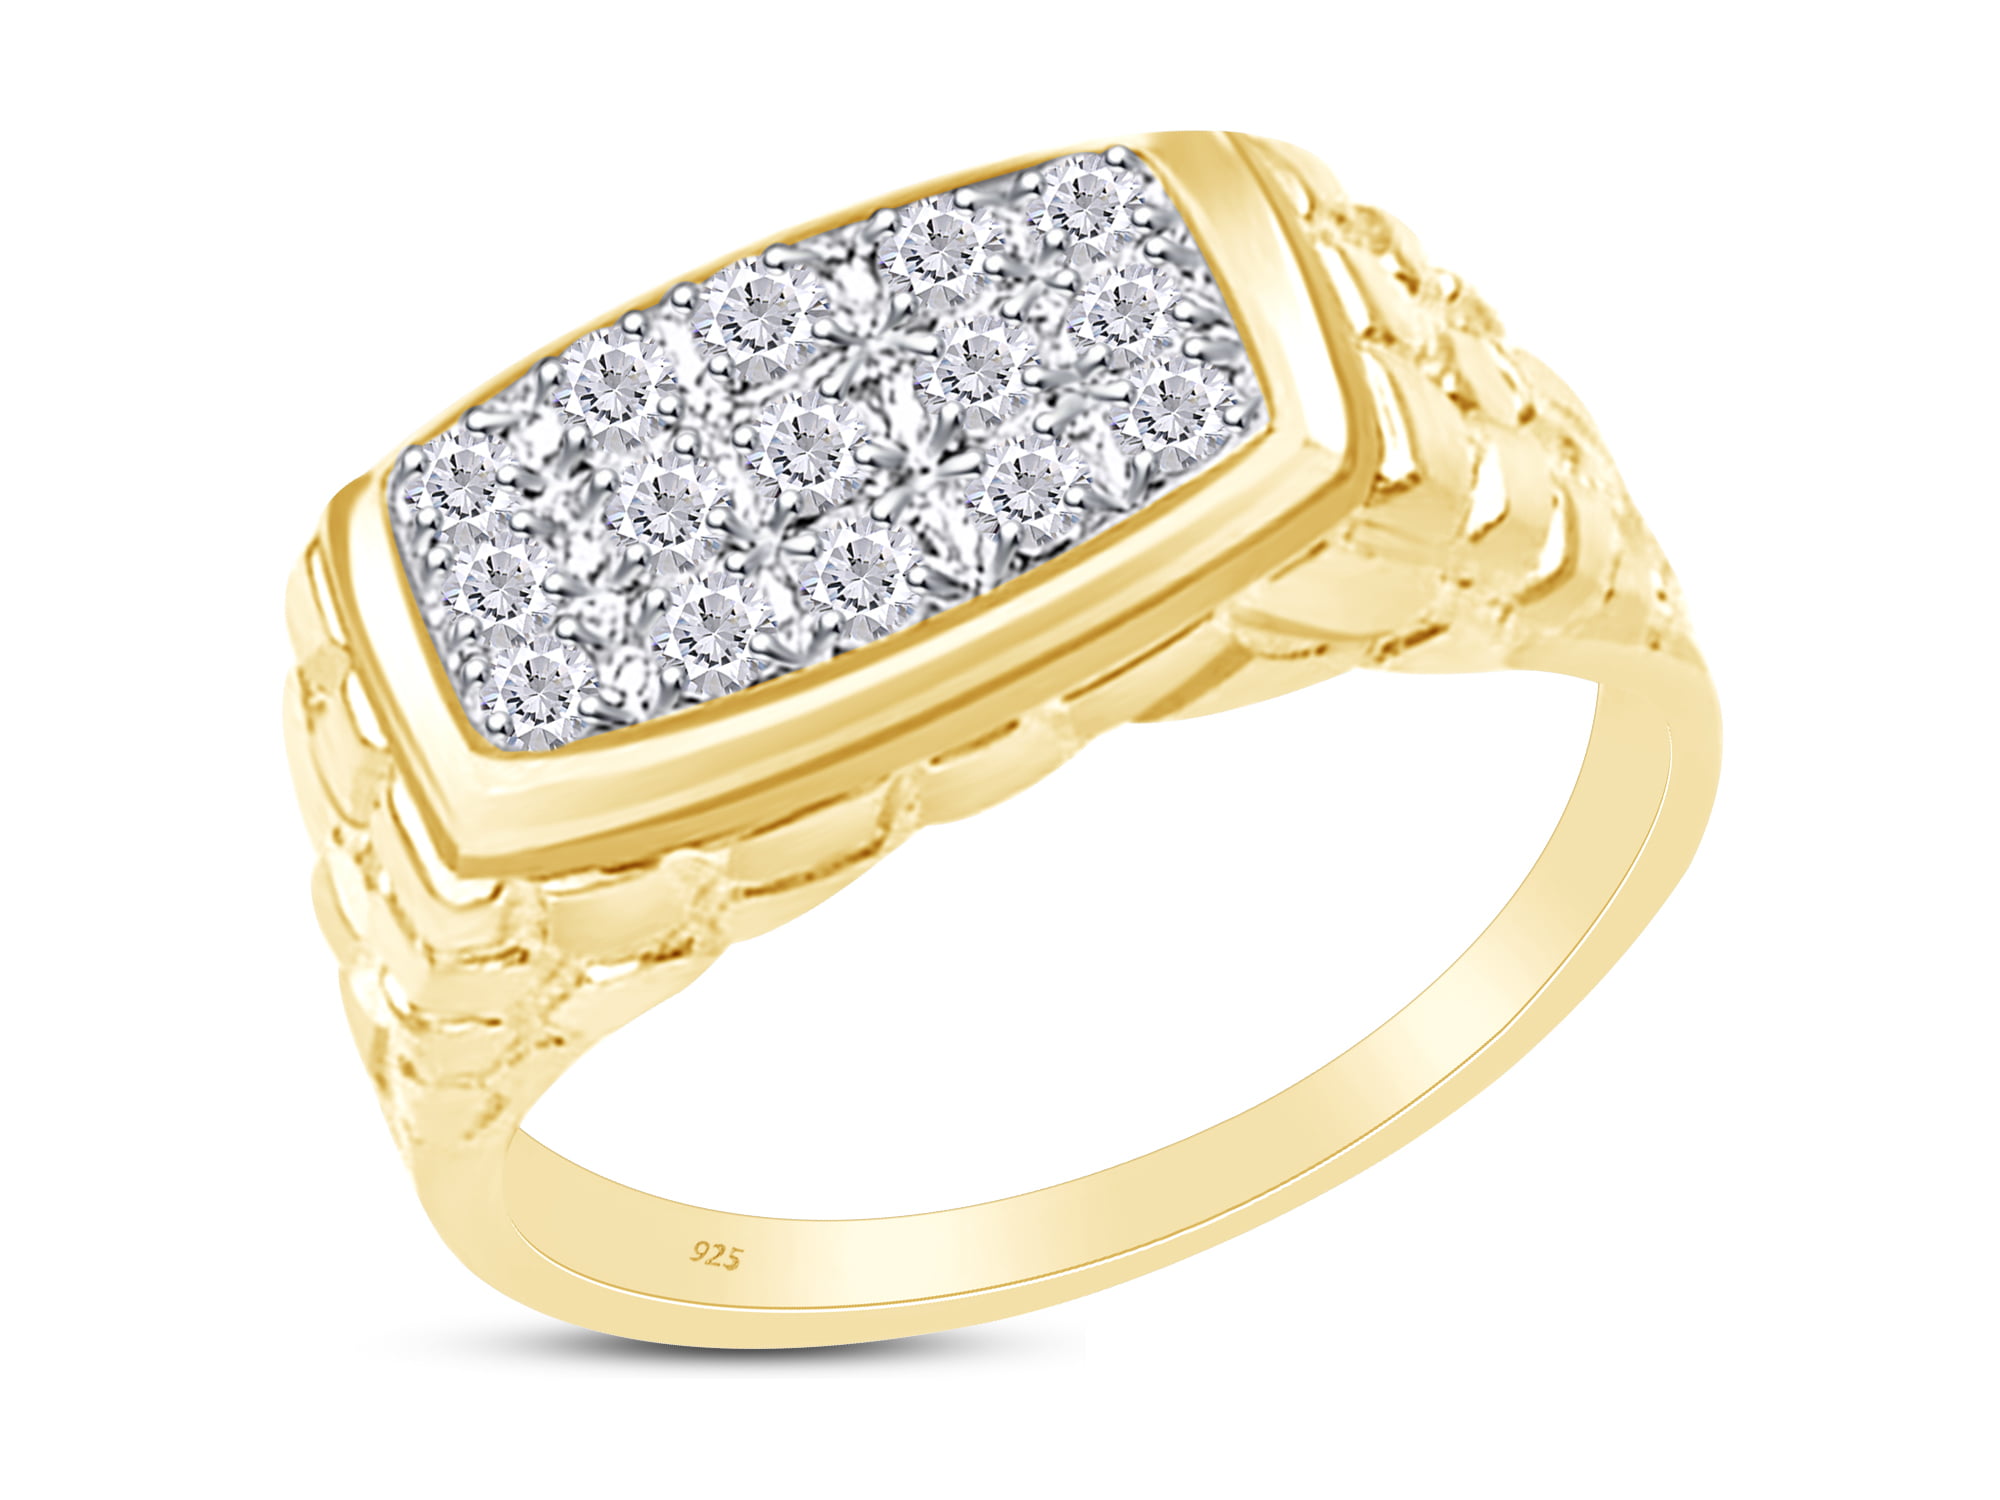 Wishrocks Round Cut White Cubic Zirconia Cluster Ring in 14K Gold Over Sterling Silver 